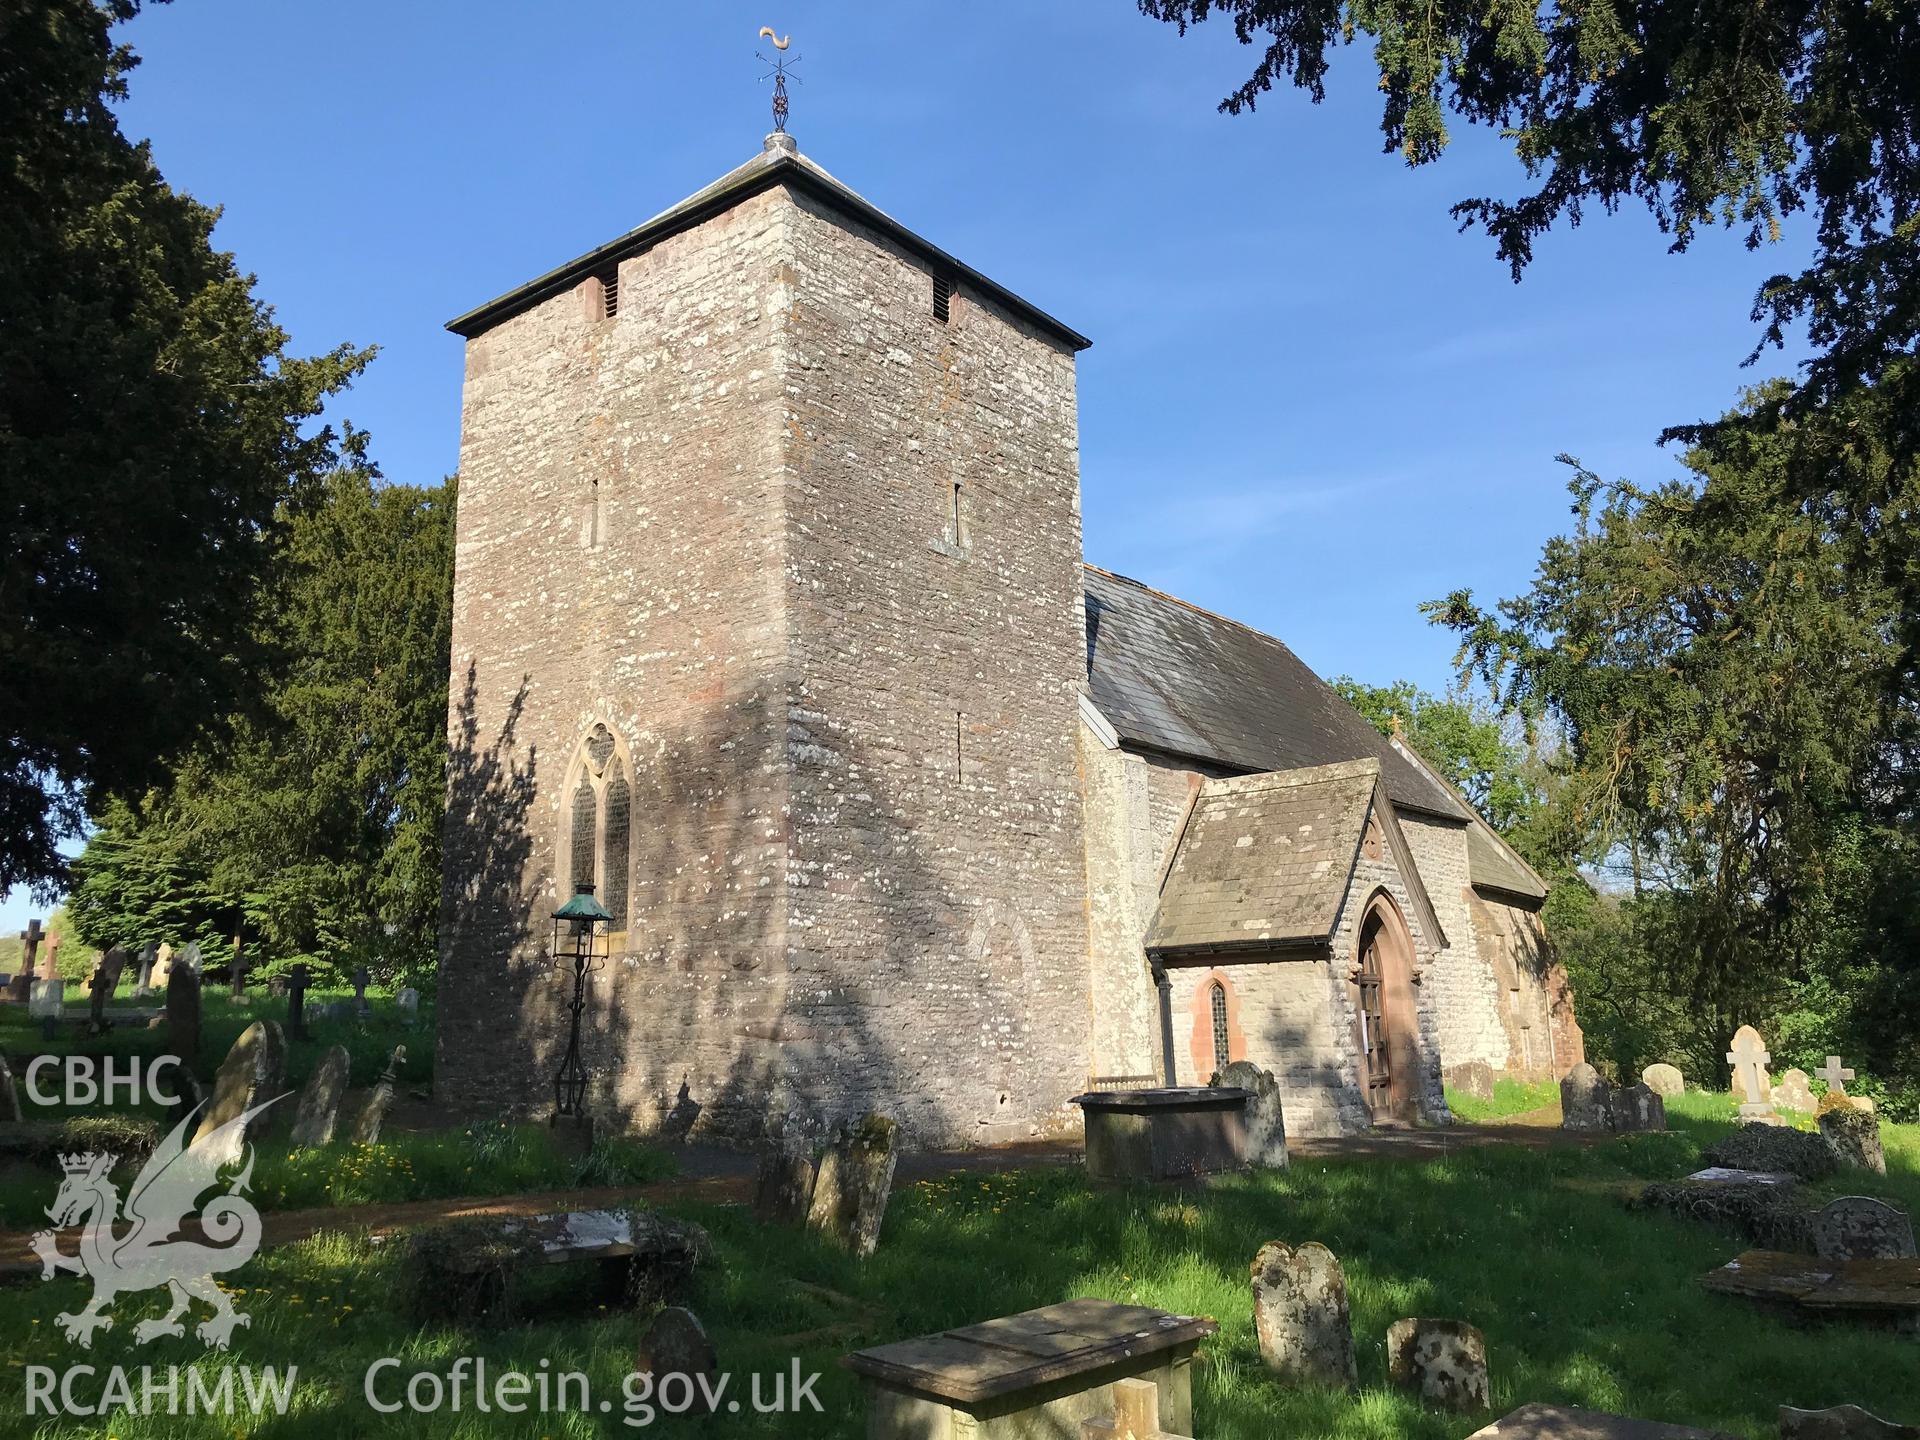 Colour photo showing exterior view of St. Maelog's church and associated graveyard, Llandyfaelog, taken by Paul R. Davis, 7th May 2018.